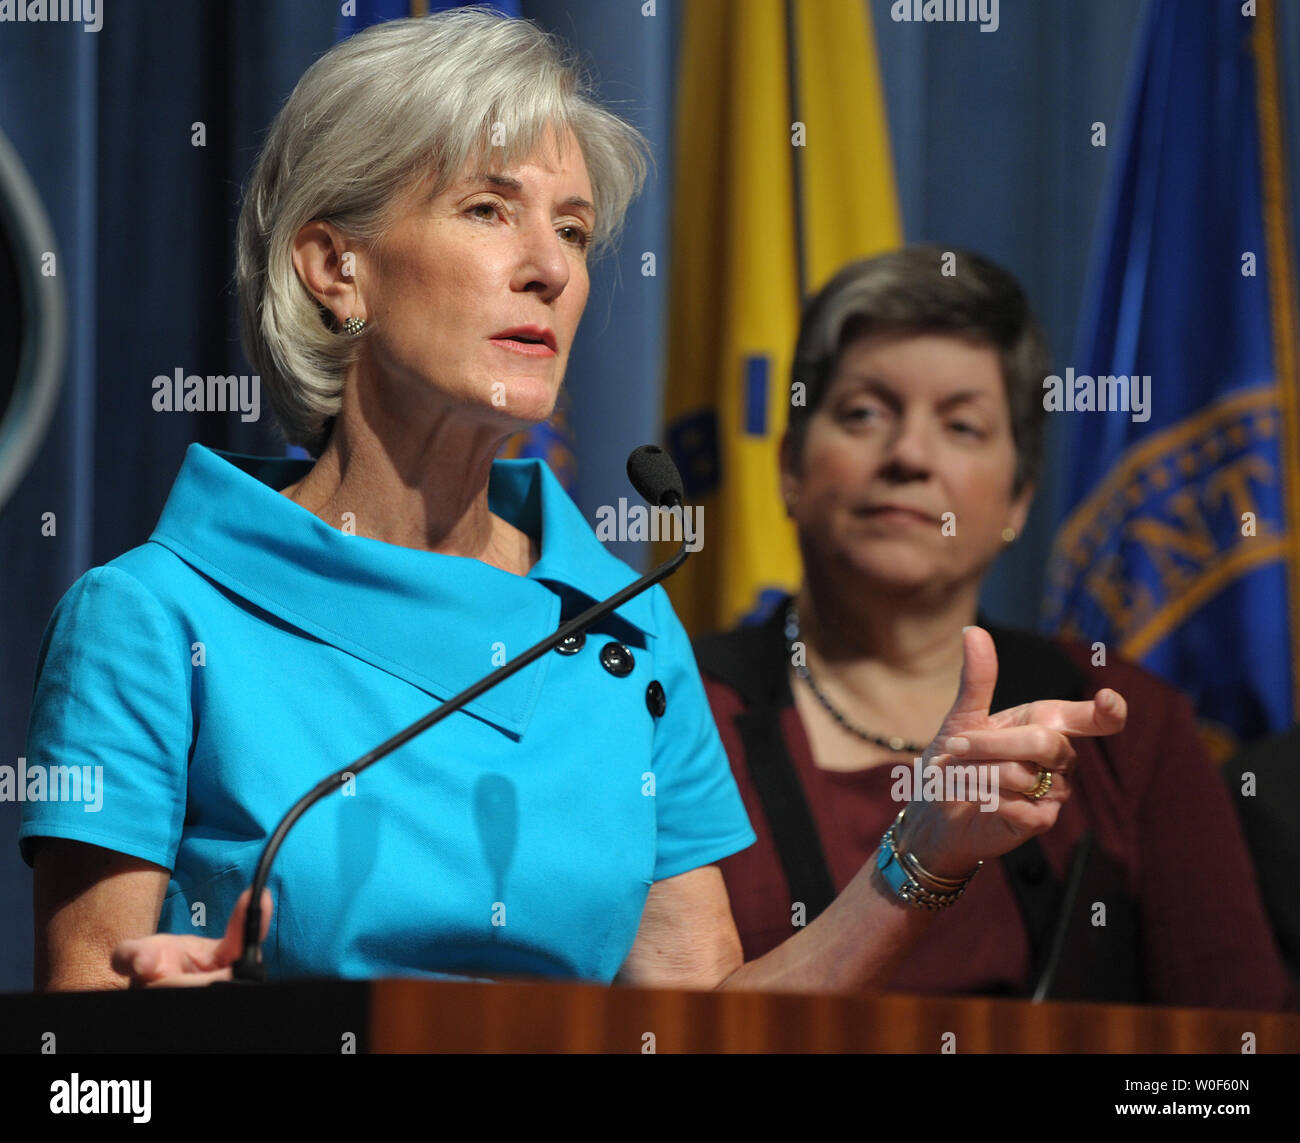 Health and Human Services Secretary Kathleen Sebelius speaks during a news conference to release updated guidance for schools during the upcoming influenza season, particularly regarding the H1N1 Flu Virus, at HHS headquarters in Washington on August 7, 2009. At right is Secretary of Homeland Security Janet Napolitano.   UPI Photo/Roger L. Wollenberg Stock Photo